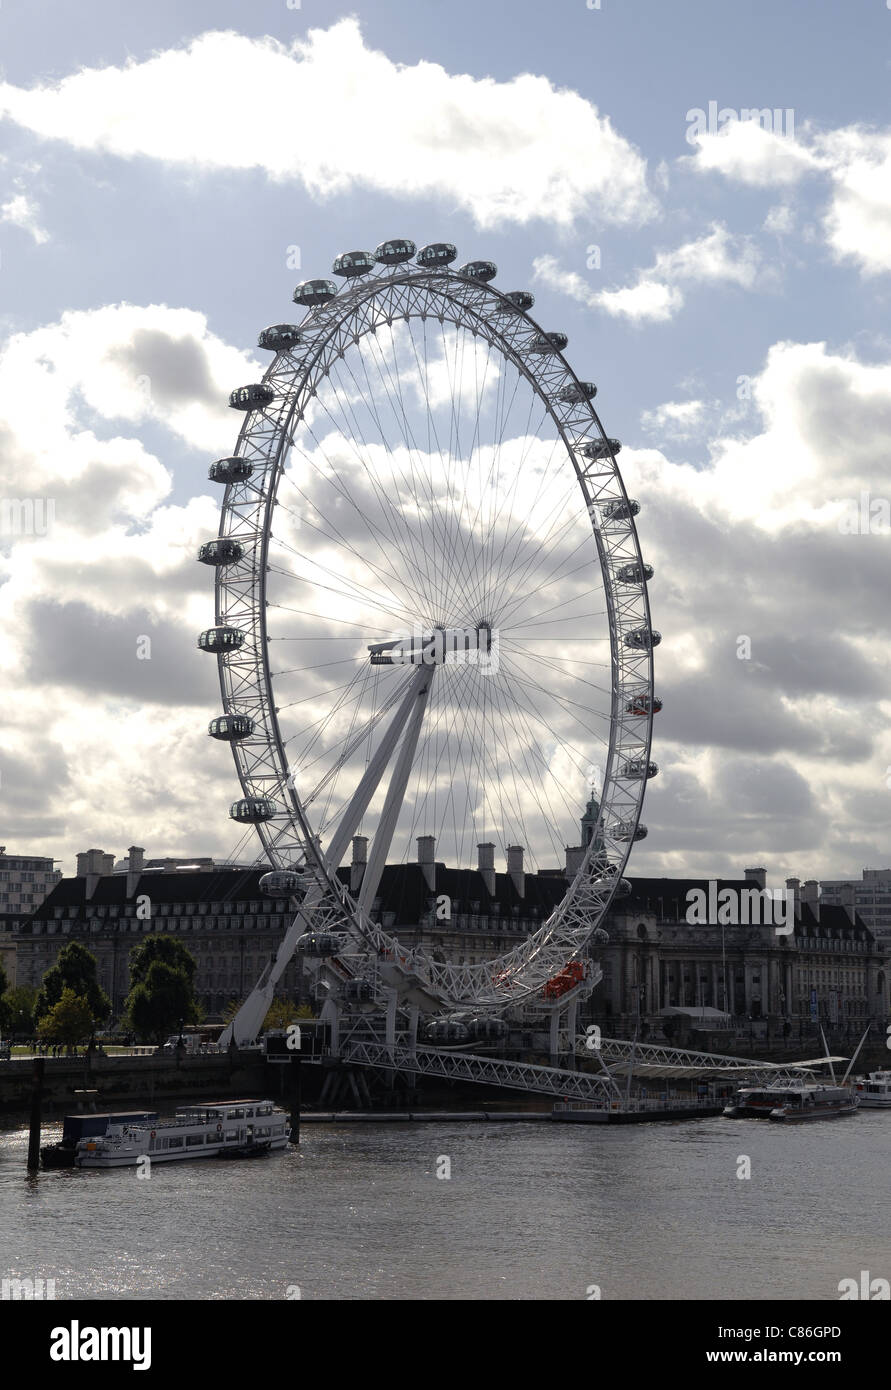 The London Eye situated on the River Thames. A popular tourist attraction, affording spectacular views across The Capital. Stock Photo